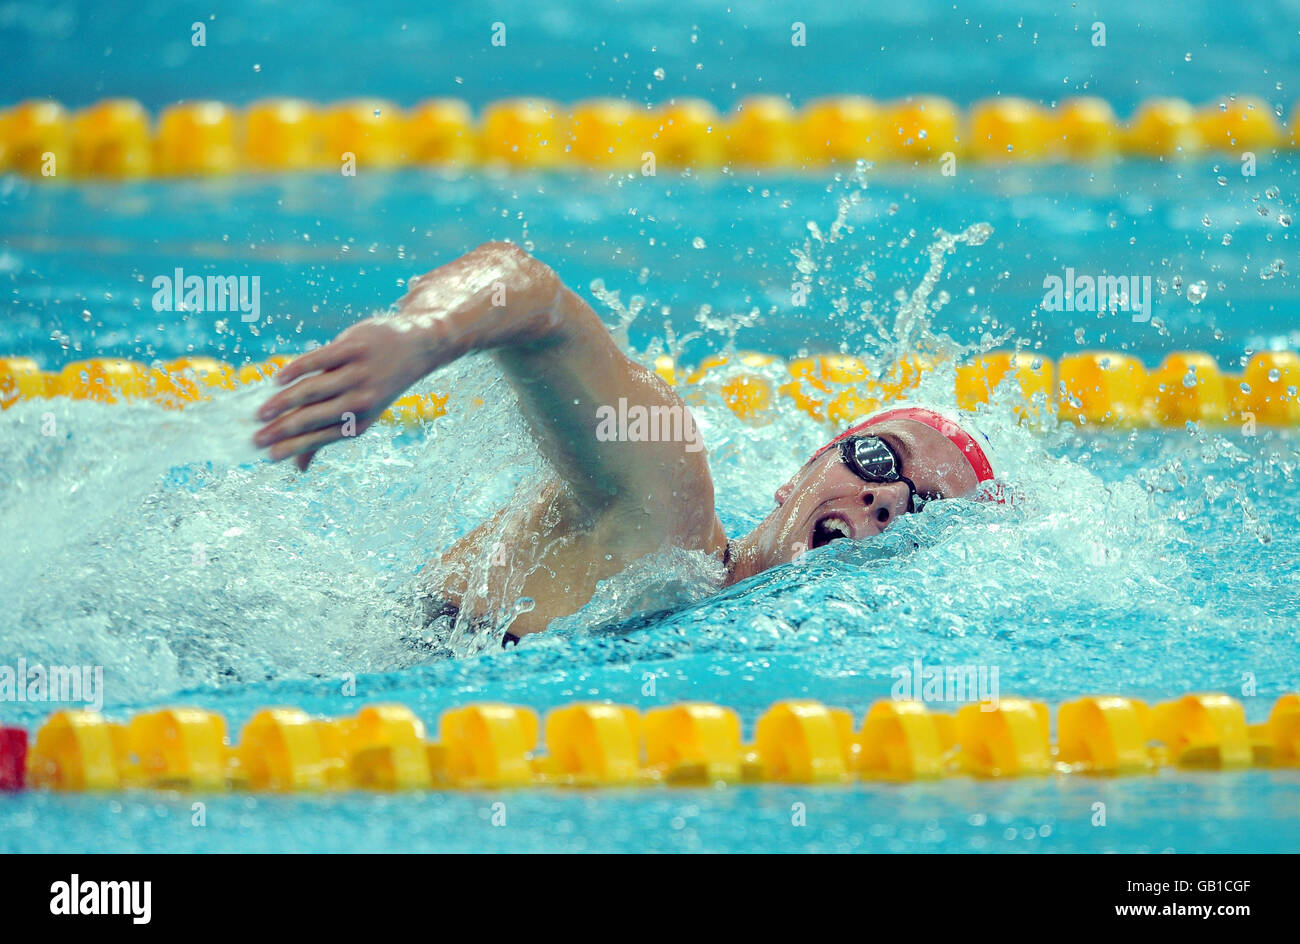 Great Britain's Thomas Haffield in action in the Men's 400m Individual Medley at the National Aquatic Center in Beijing, China. Stock Photo